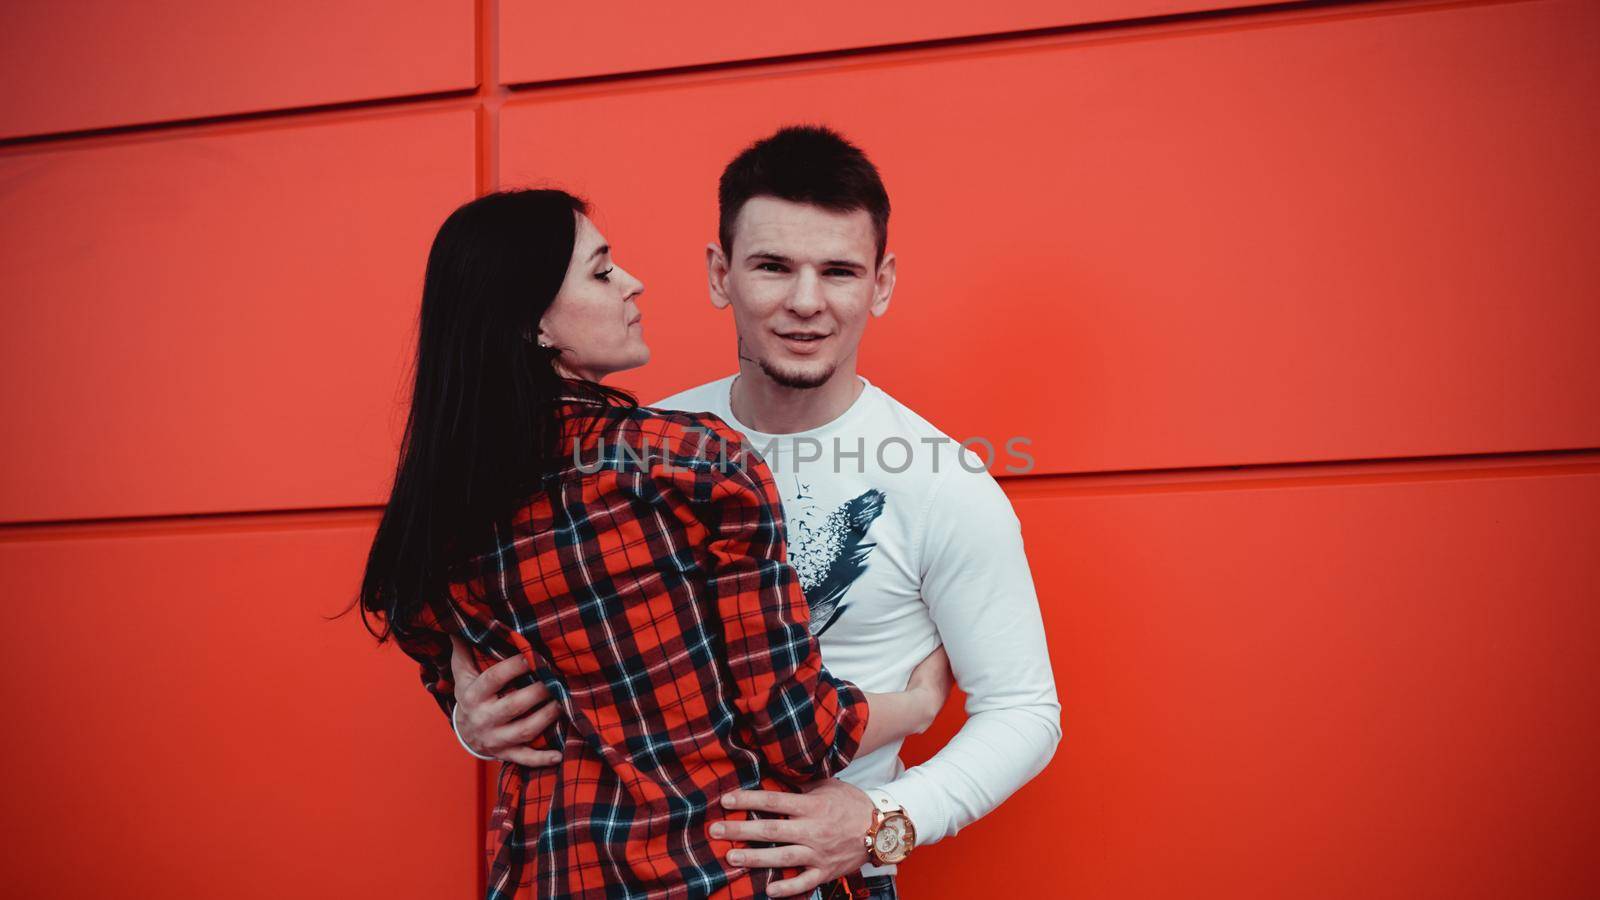 Couple dating and hugging in love in an urban in a sunny day - red background